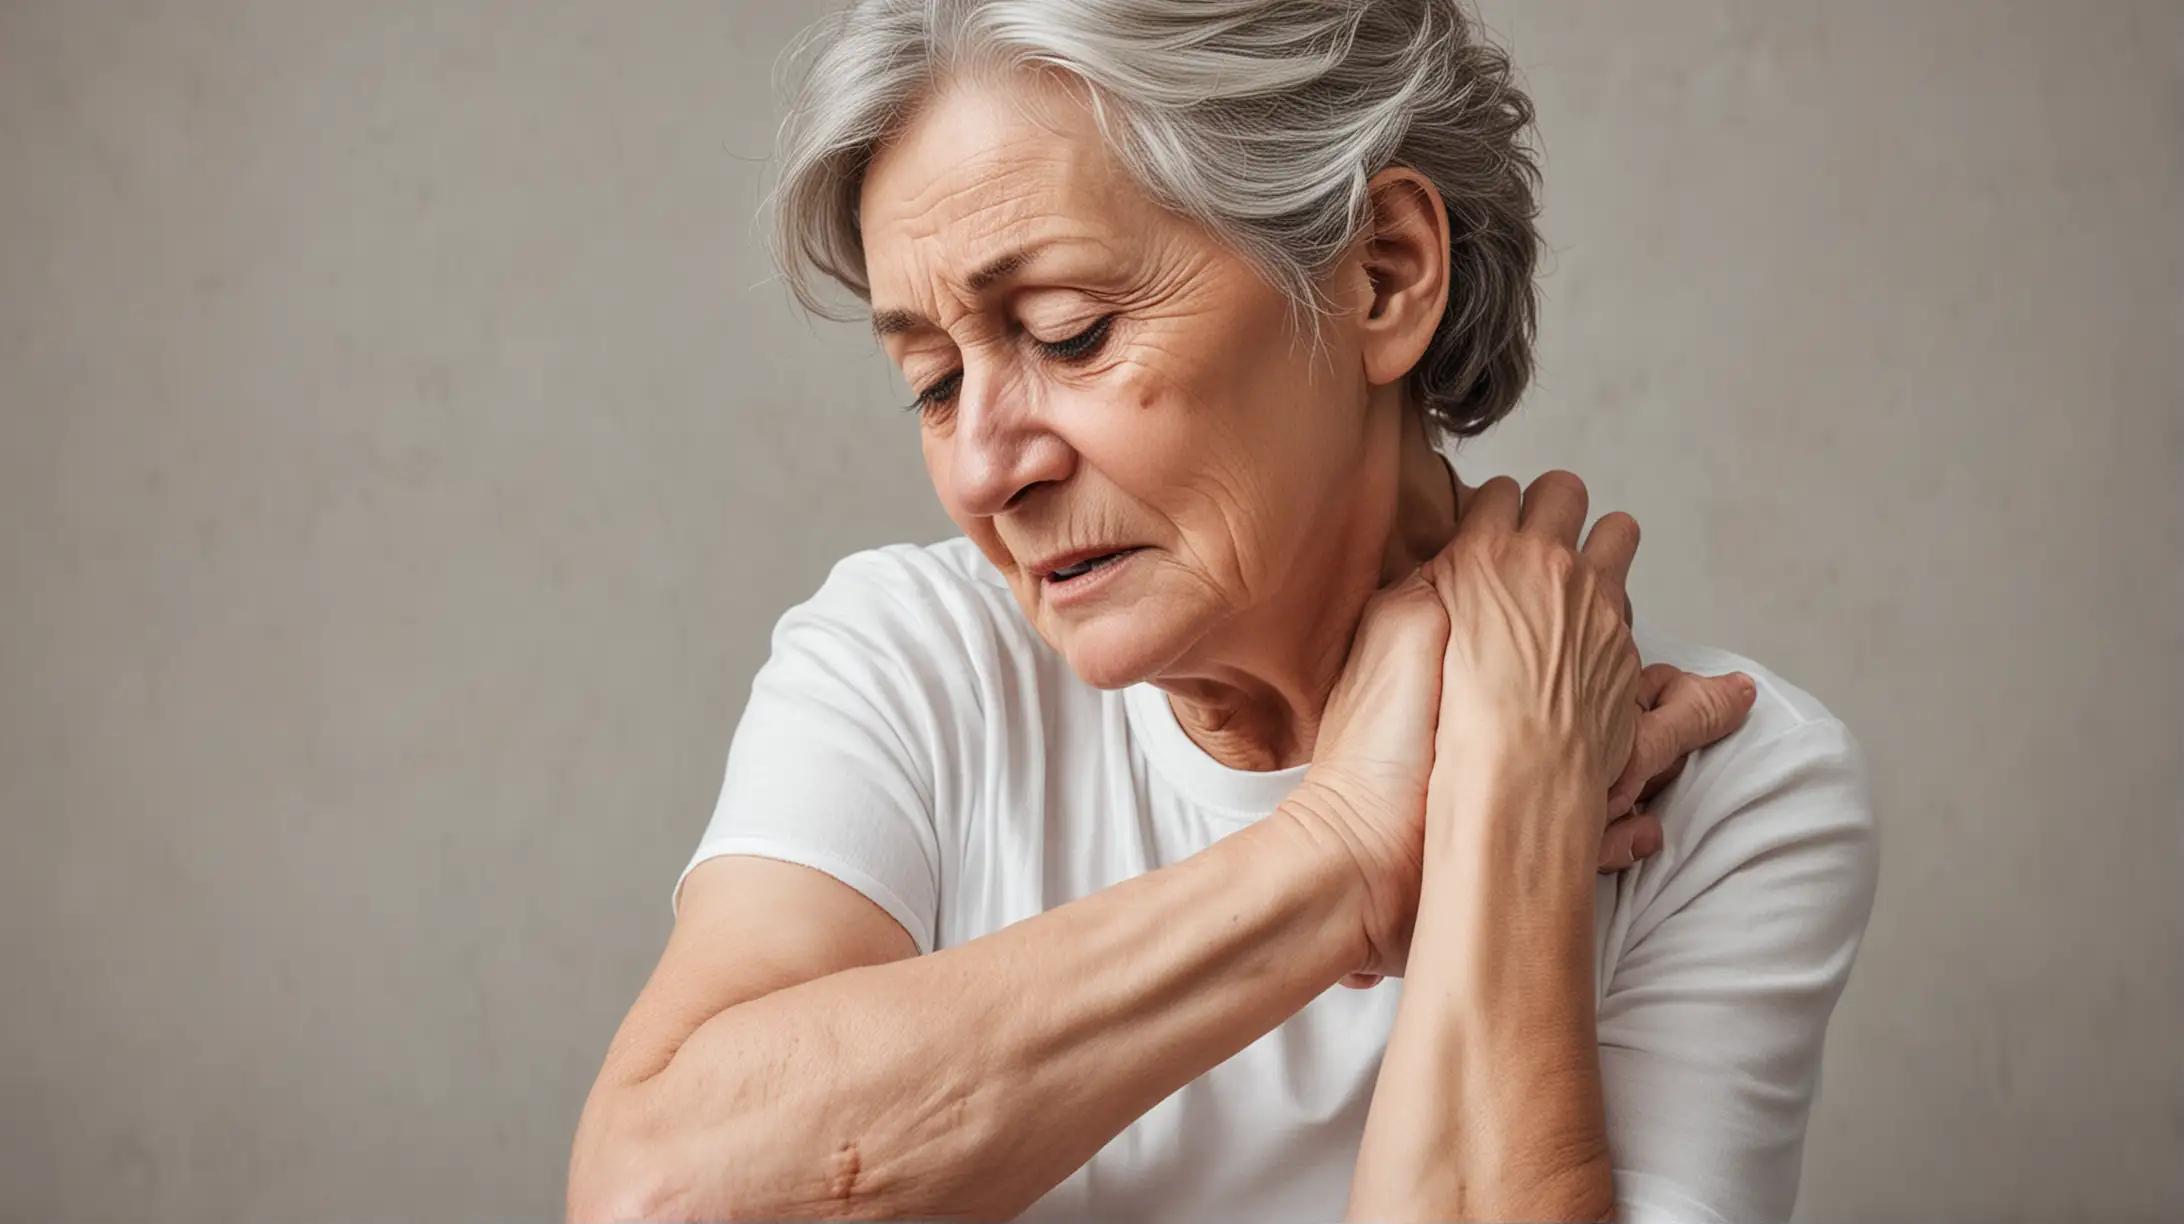 older woman in pain holding an elbow